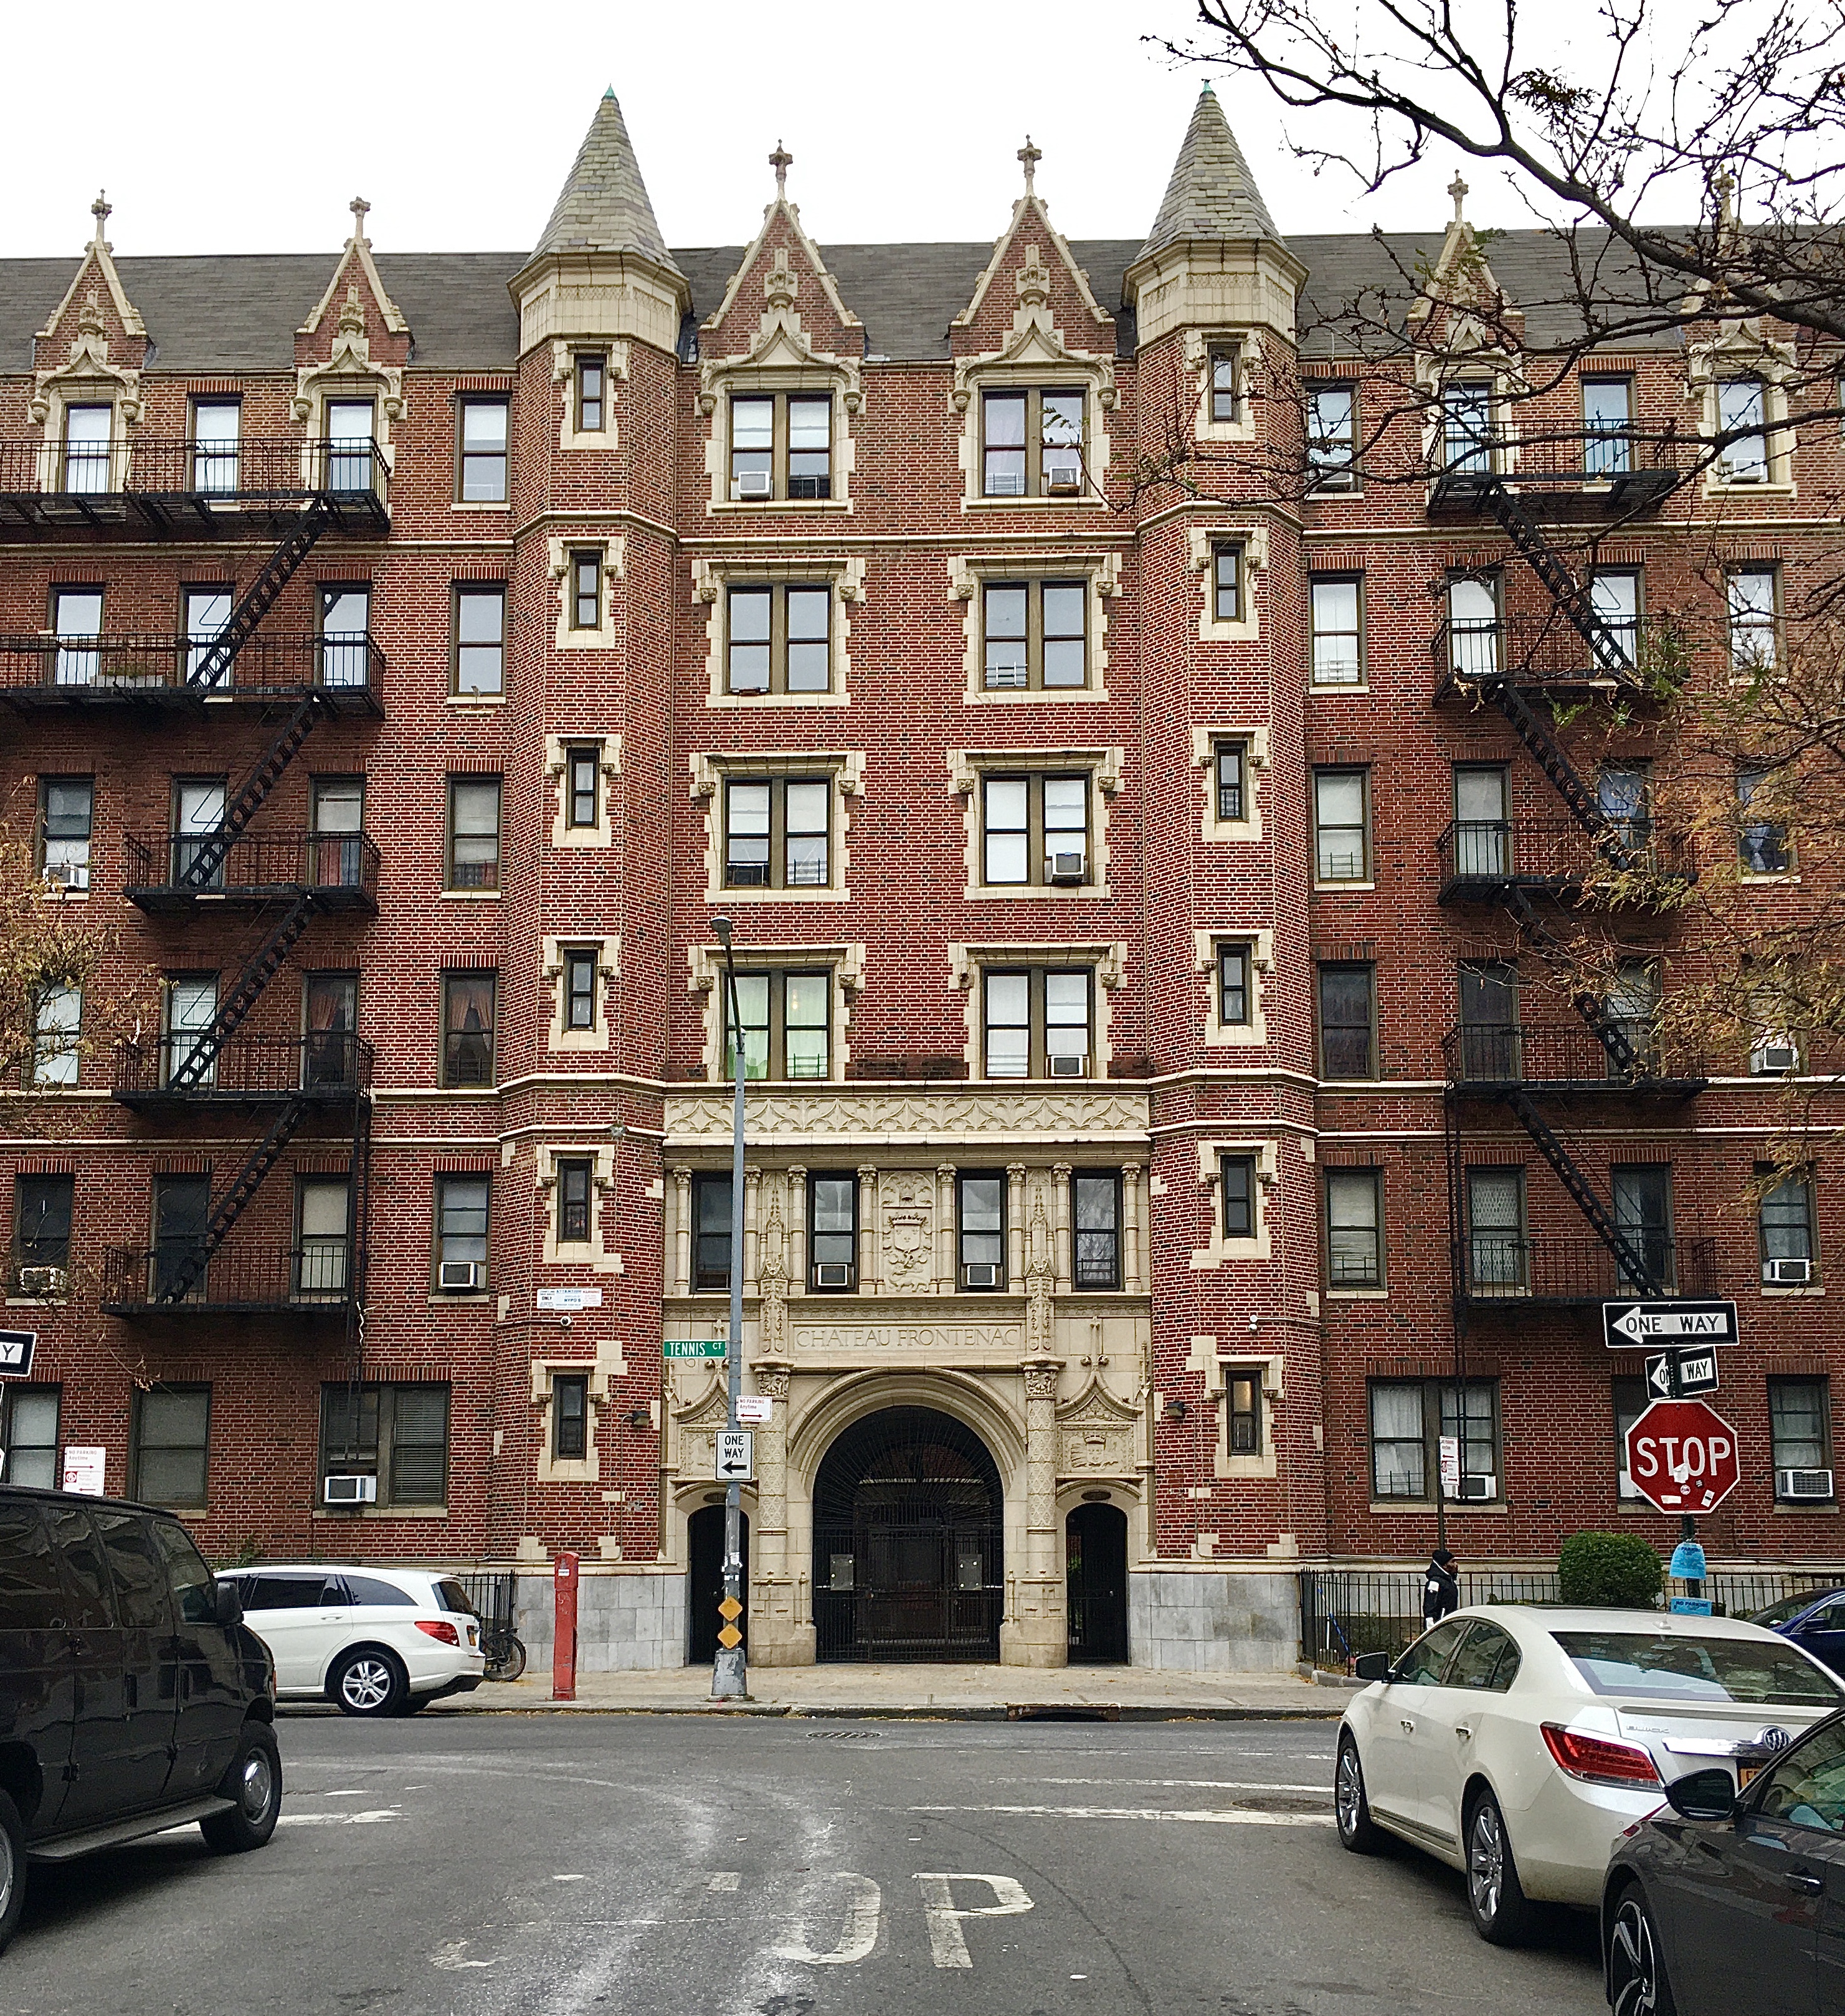 This apartment building, Chateau Frontenac, is located on a street called Tennis Court. Photo: Lore Croghan/Brooklyn Eagle